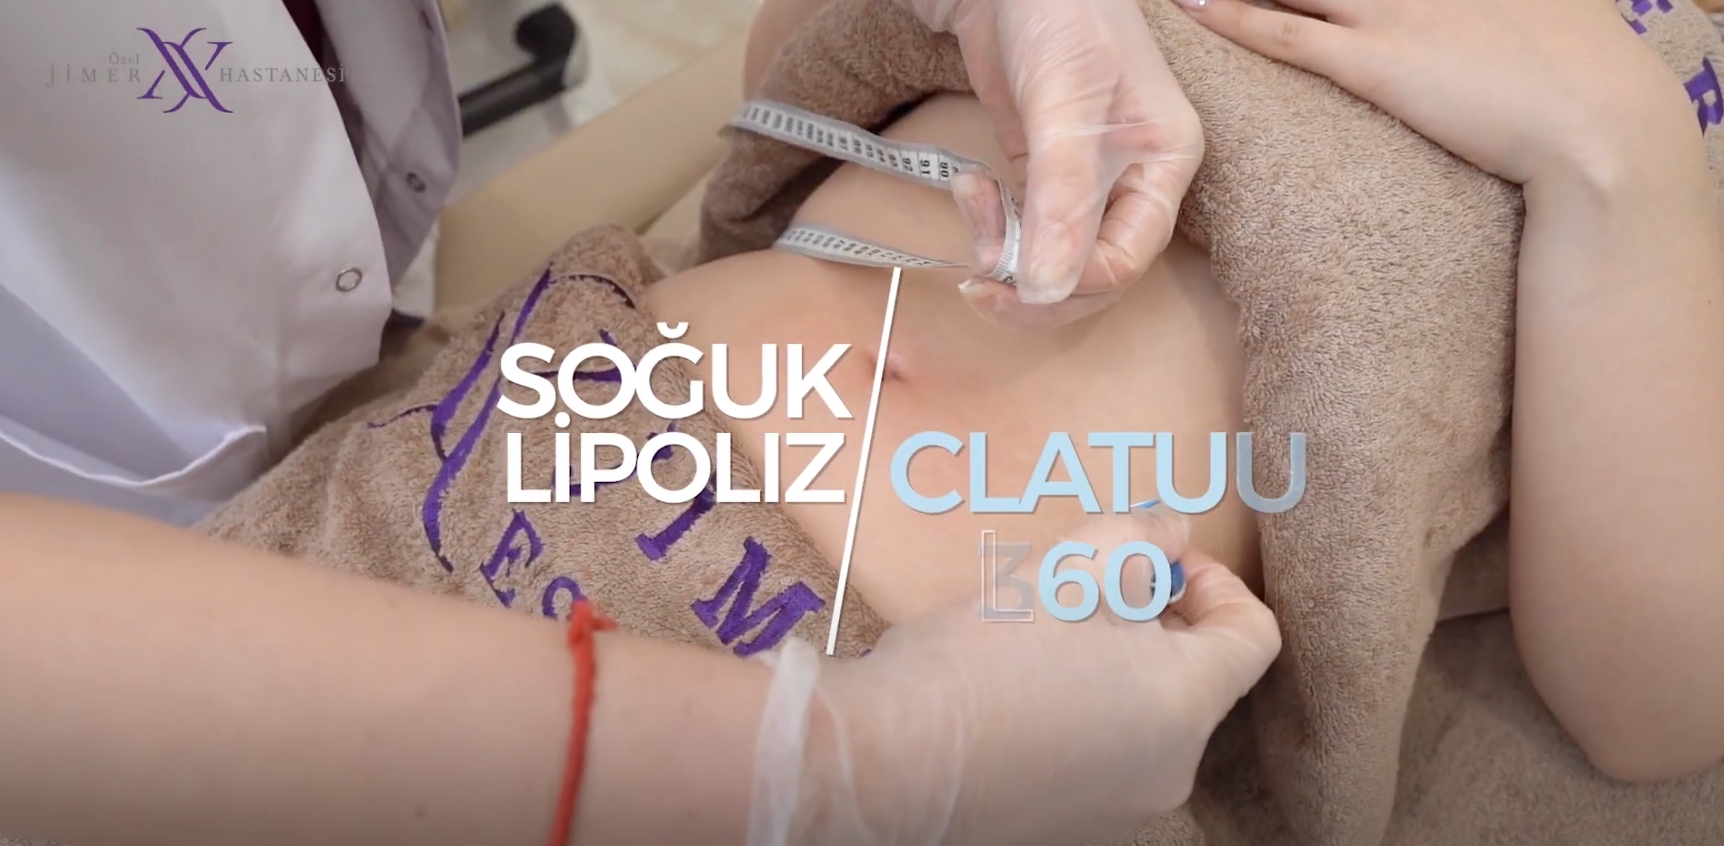 Cryolipolysis Clatuu 360 - Freeze and Eliminate Regional Fat! - Slimming in one session!